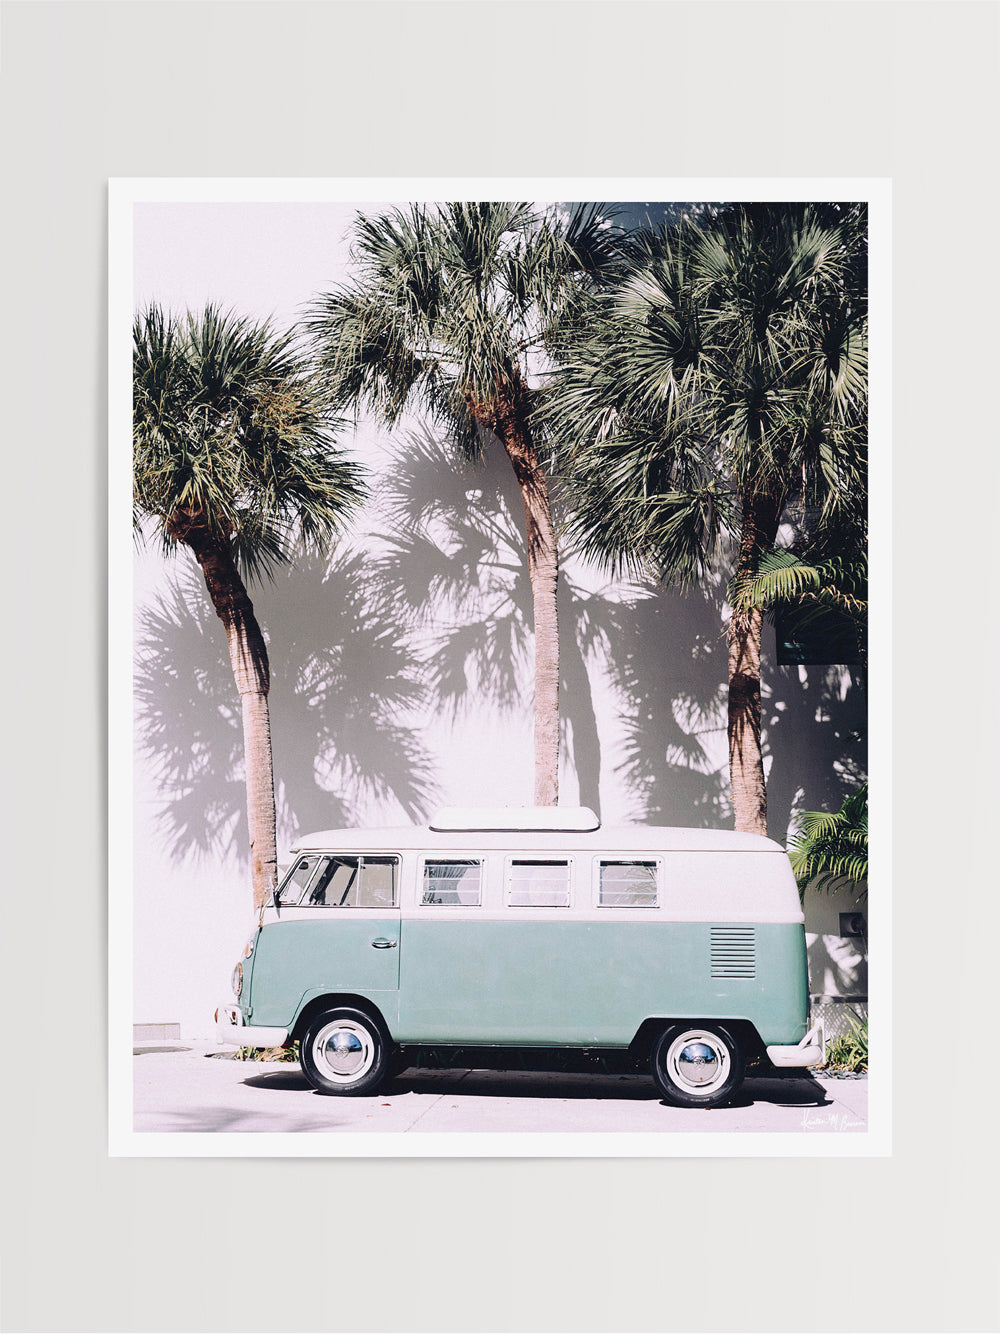 Life is simple - - surf 🏄🏼‍♀️ , jam 🎸, live life in a VW Van 🚌 . Channel those carefree, summertime beach days at home with this turquoise VW bus print. Palmetto Bus print by Kristen M. Brown, Samba to the Sea.